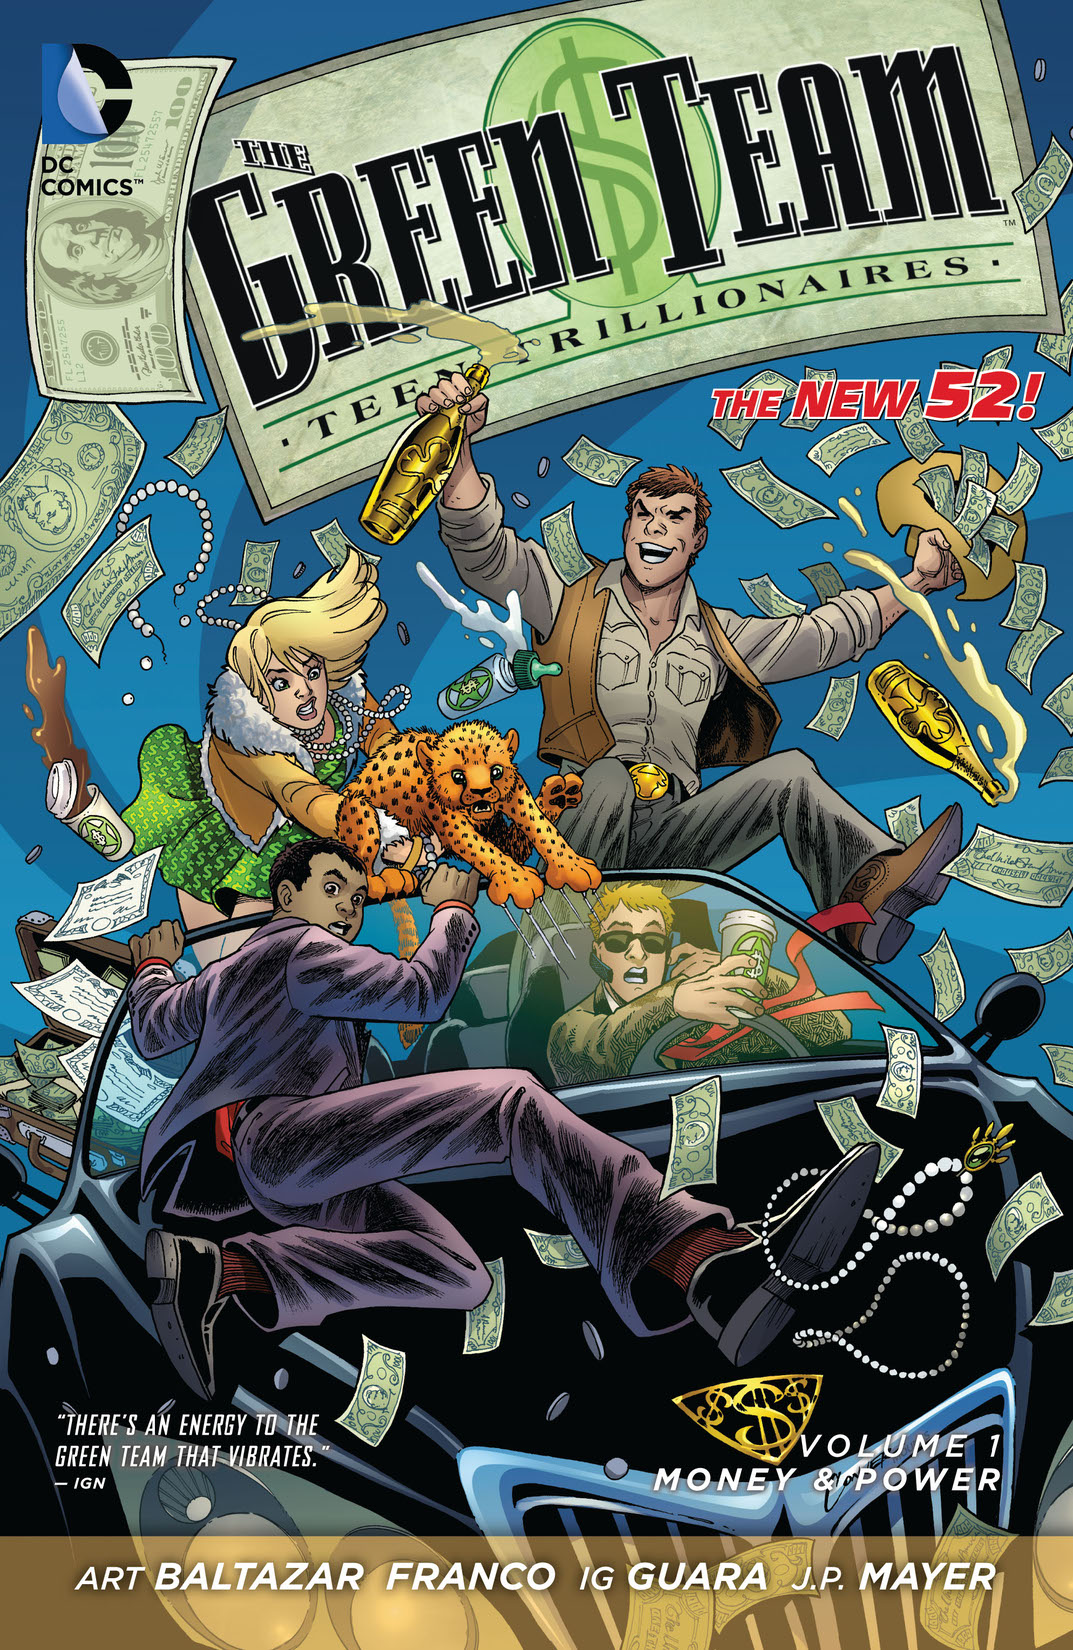 The Green Team: Teen Trillionaires Vol. 1: Money and Power preview images